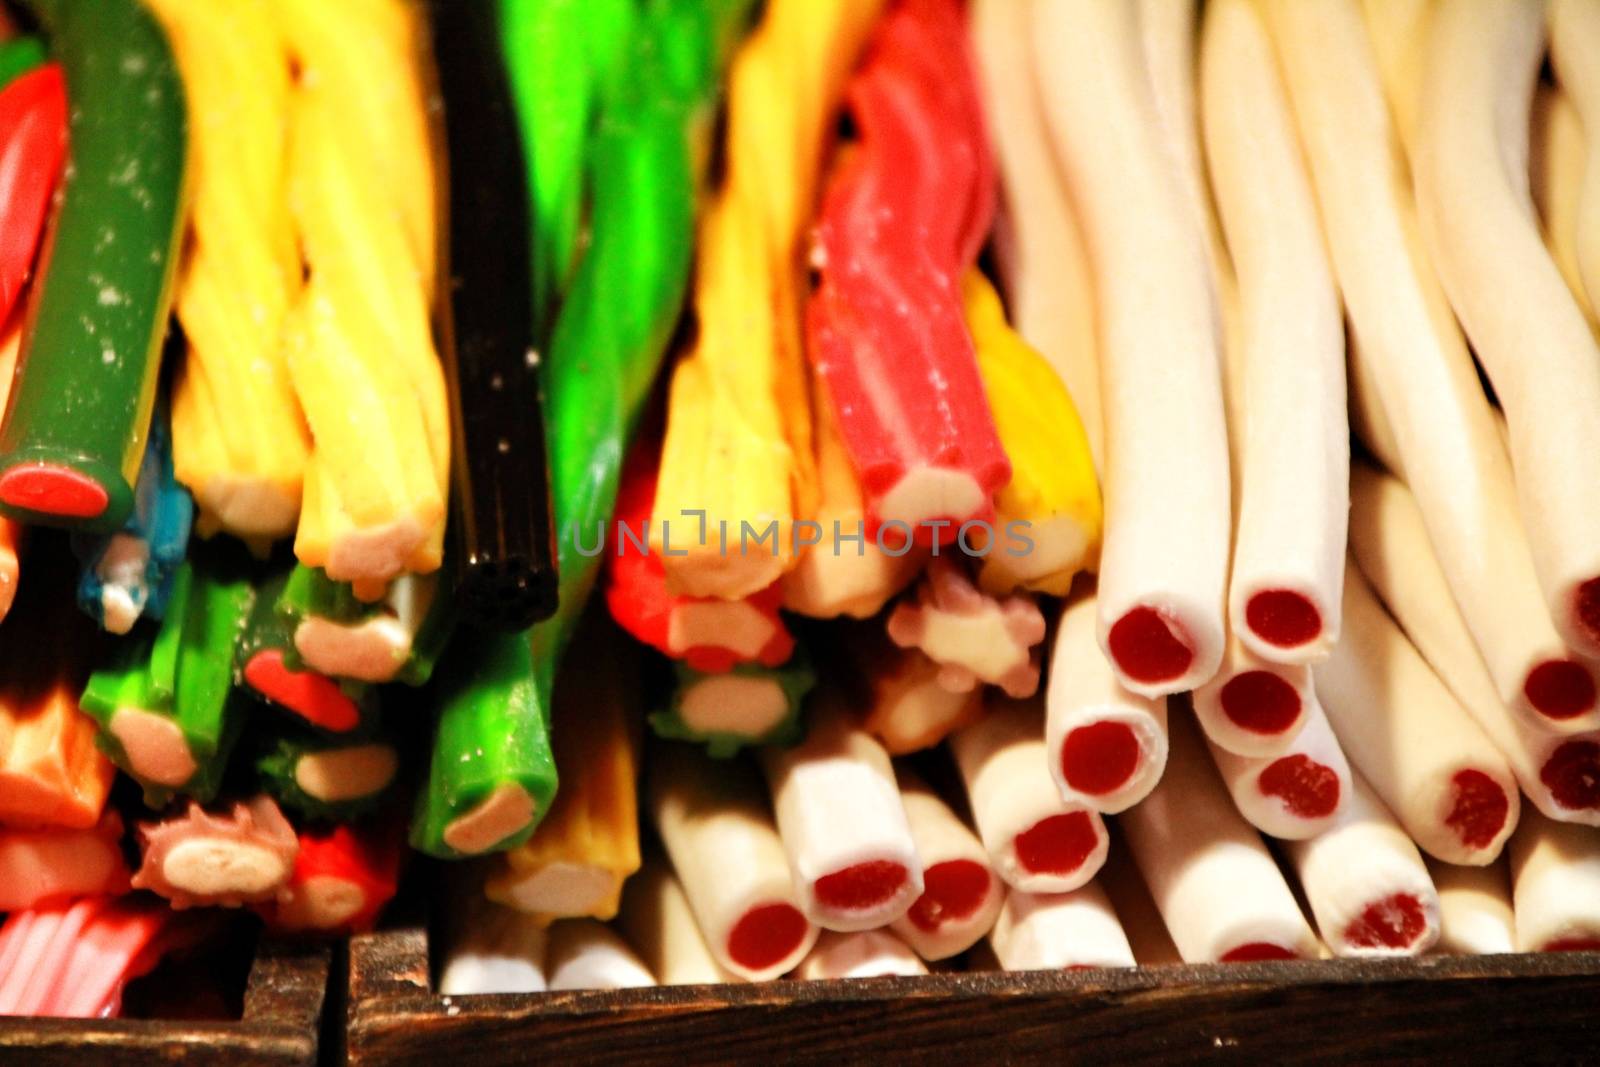 Candies of various colors and flavors in a street stall by soniabonet